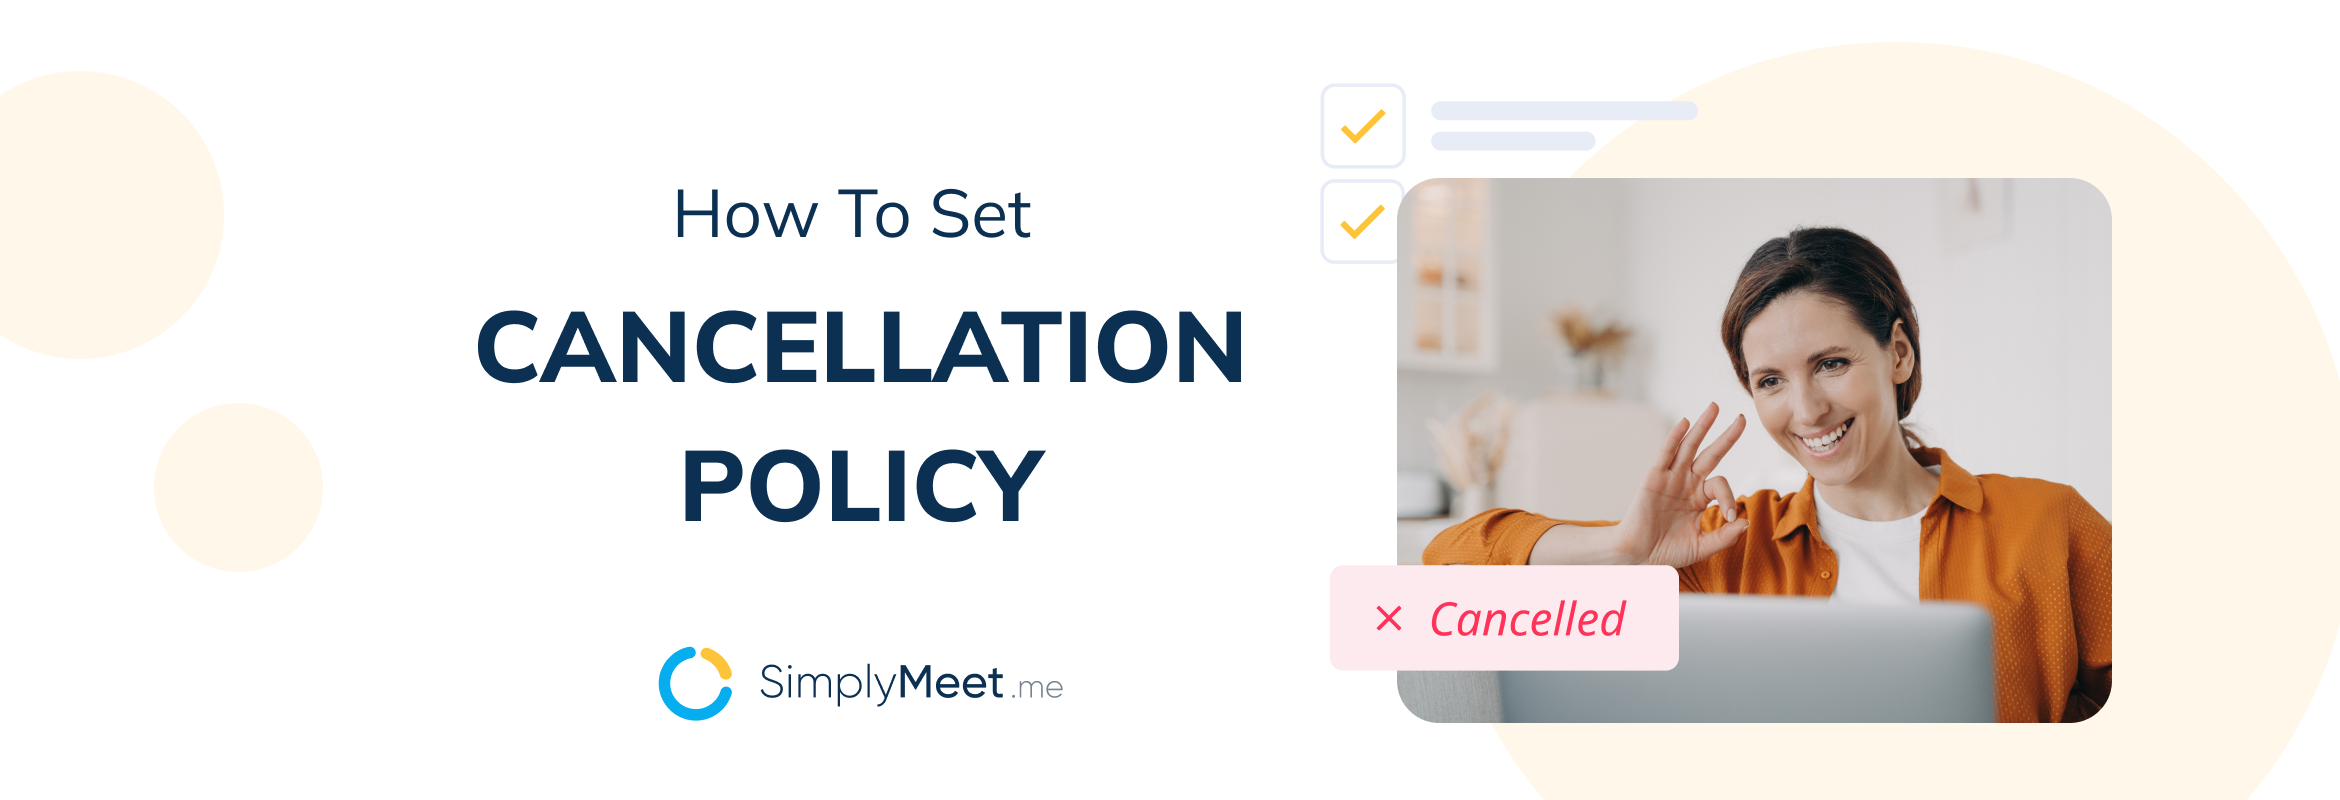 How to Set a Cancellation Policy in SimplyMeet.me Intro Reduce Cancellations with a Clear Cancellation Policy How to Set a Clear Cancellation Policy in SimplyMeet.me